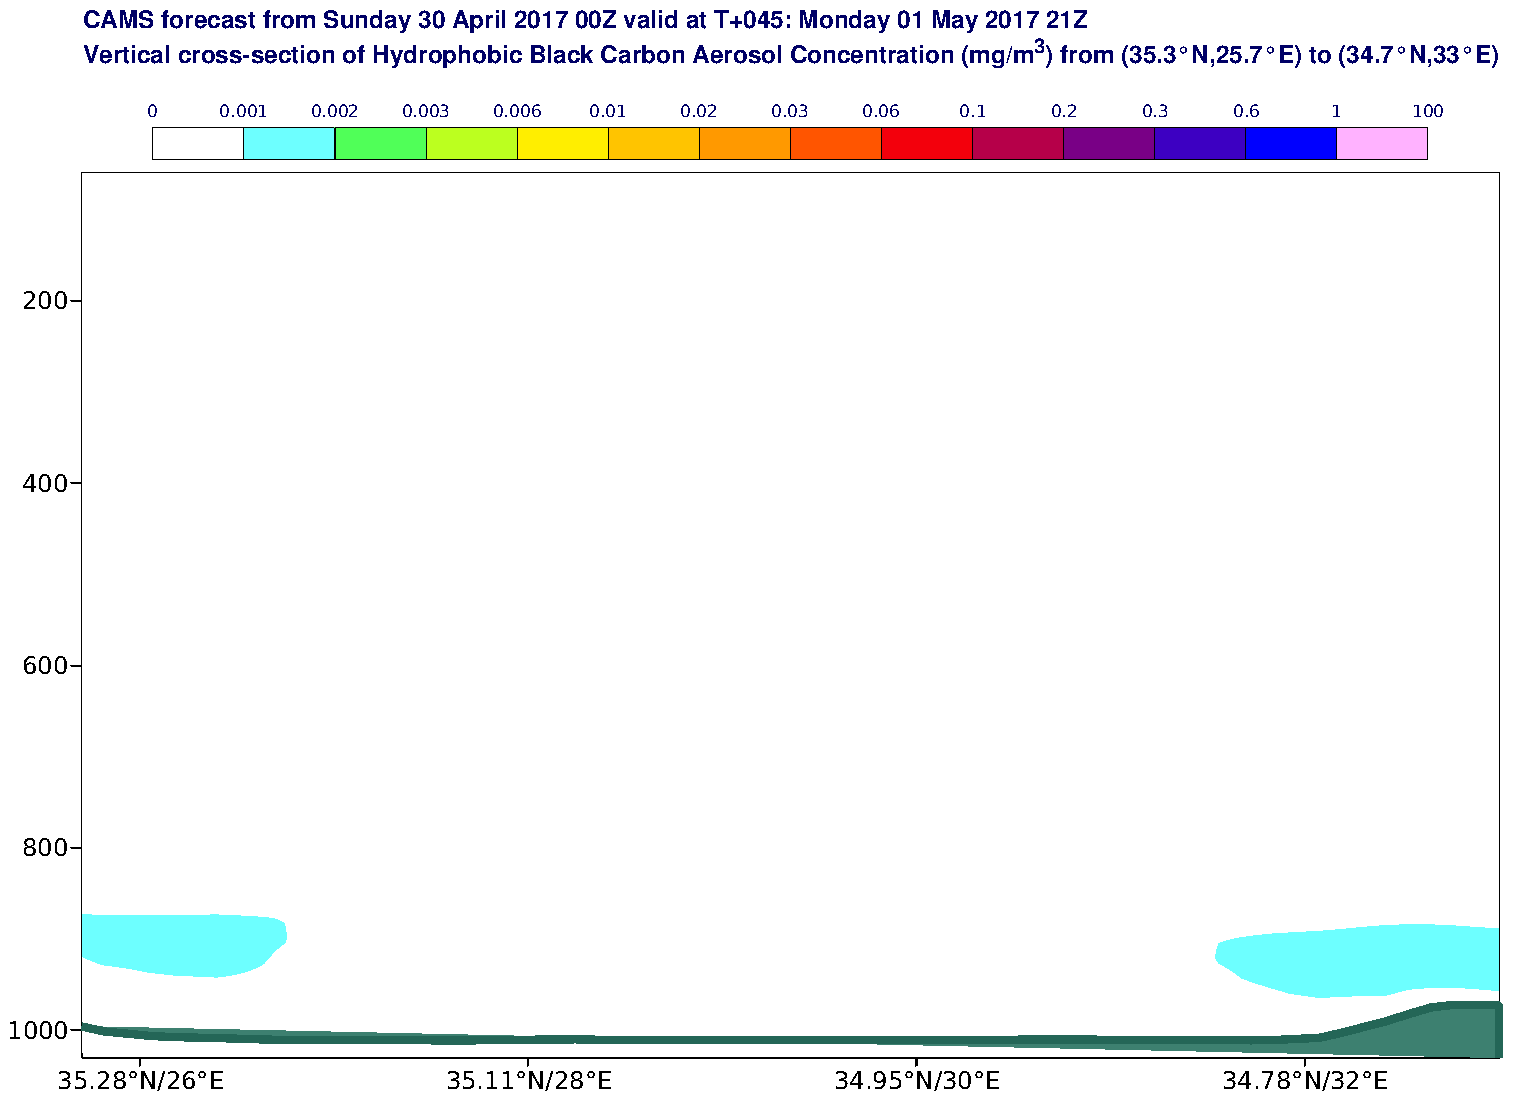 Vertical cross-section of Hydrophobic Black Carbon Aerosol Concentration (mg/m3) valid at T45 - 2017-05-01 21:00